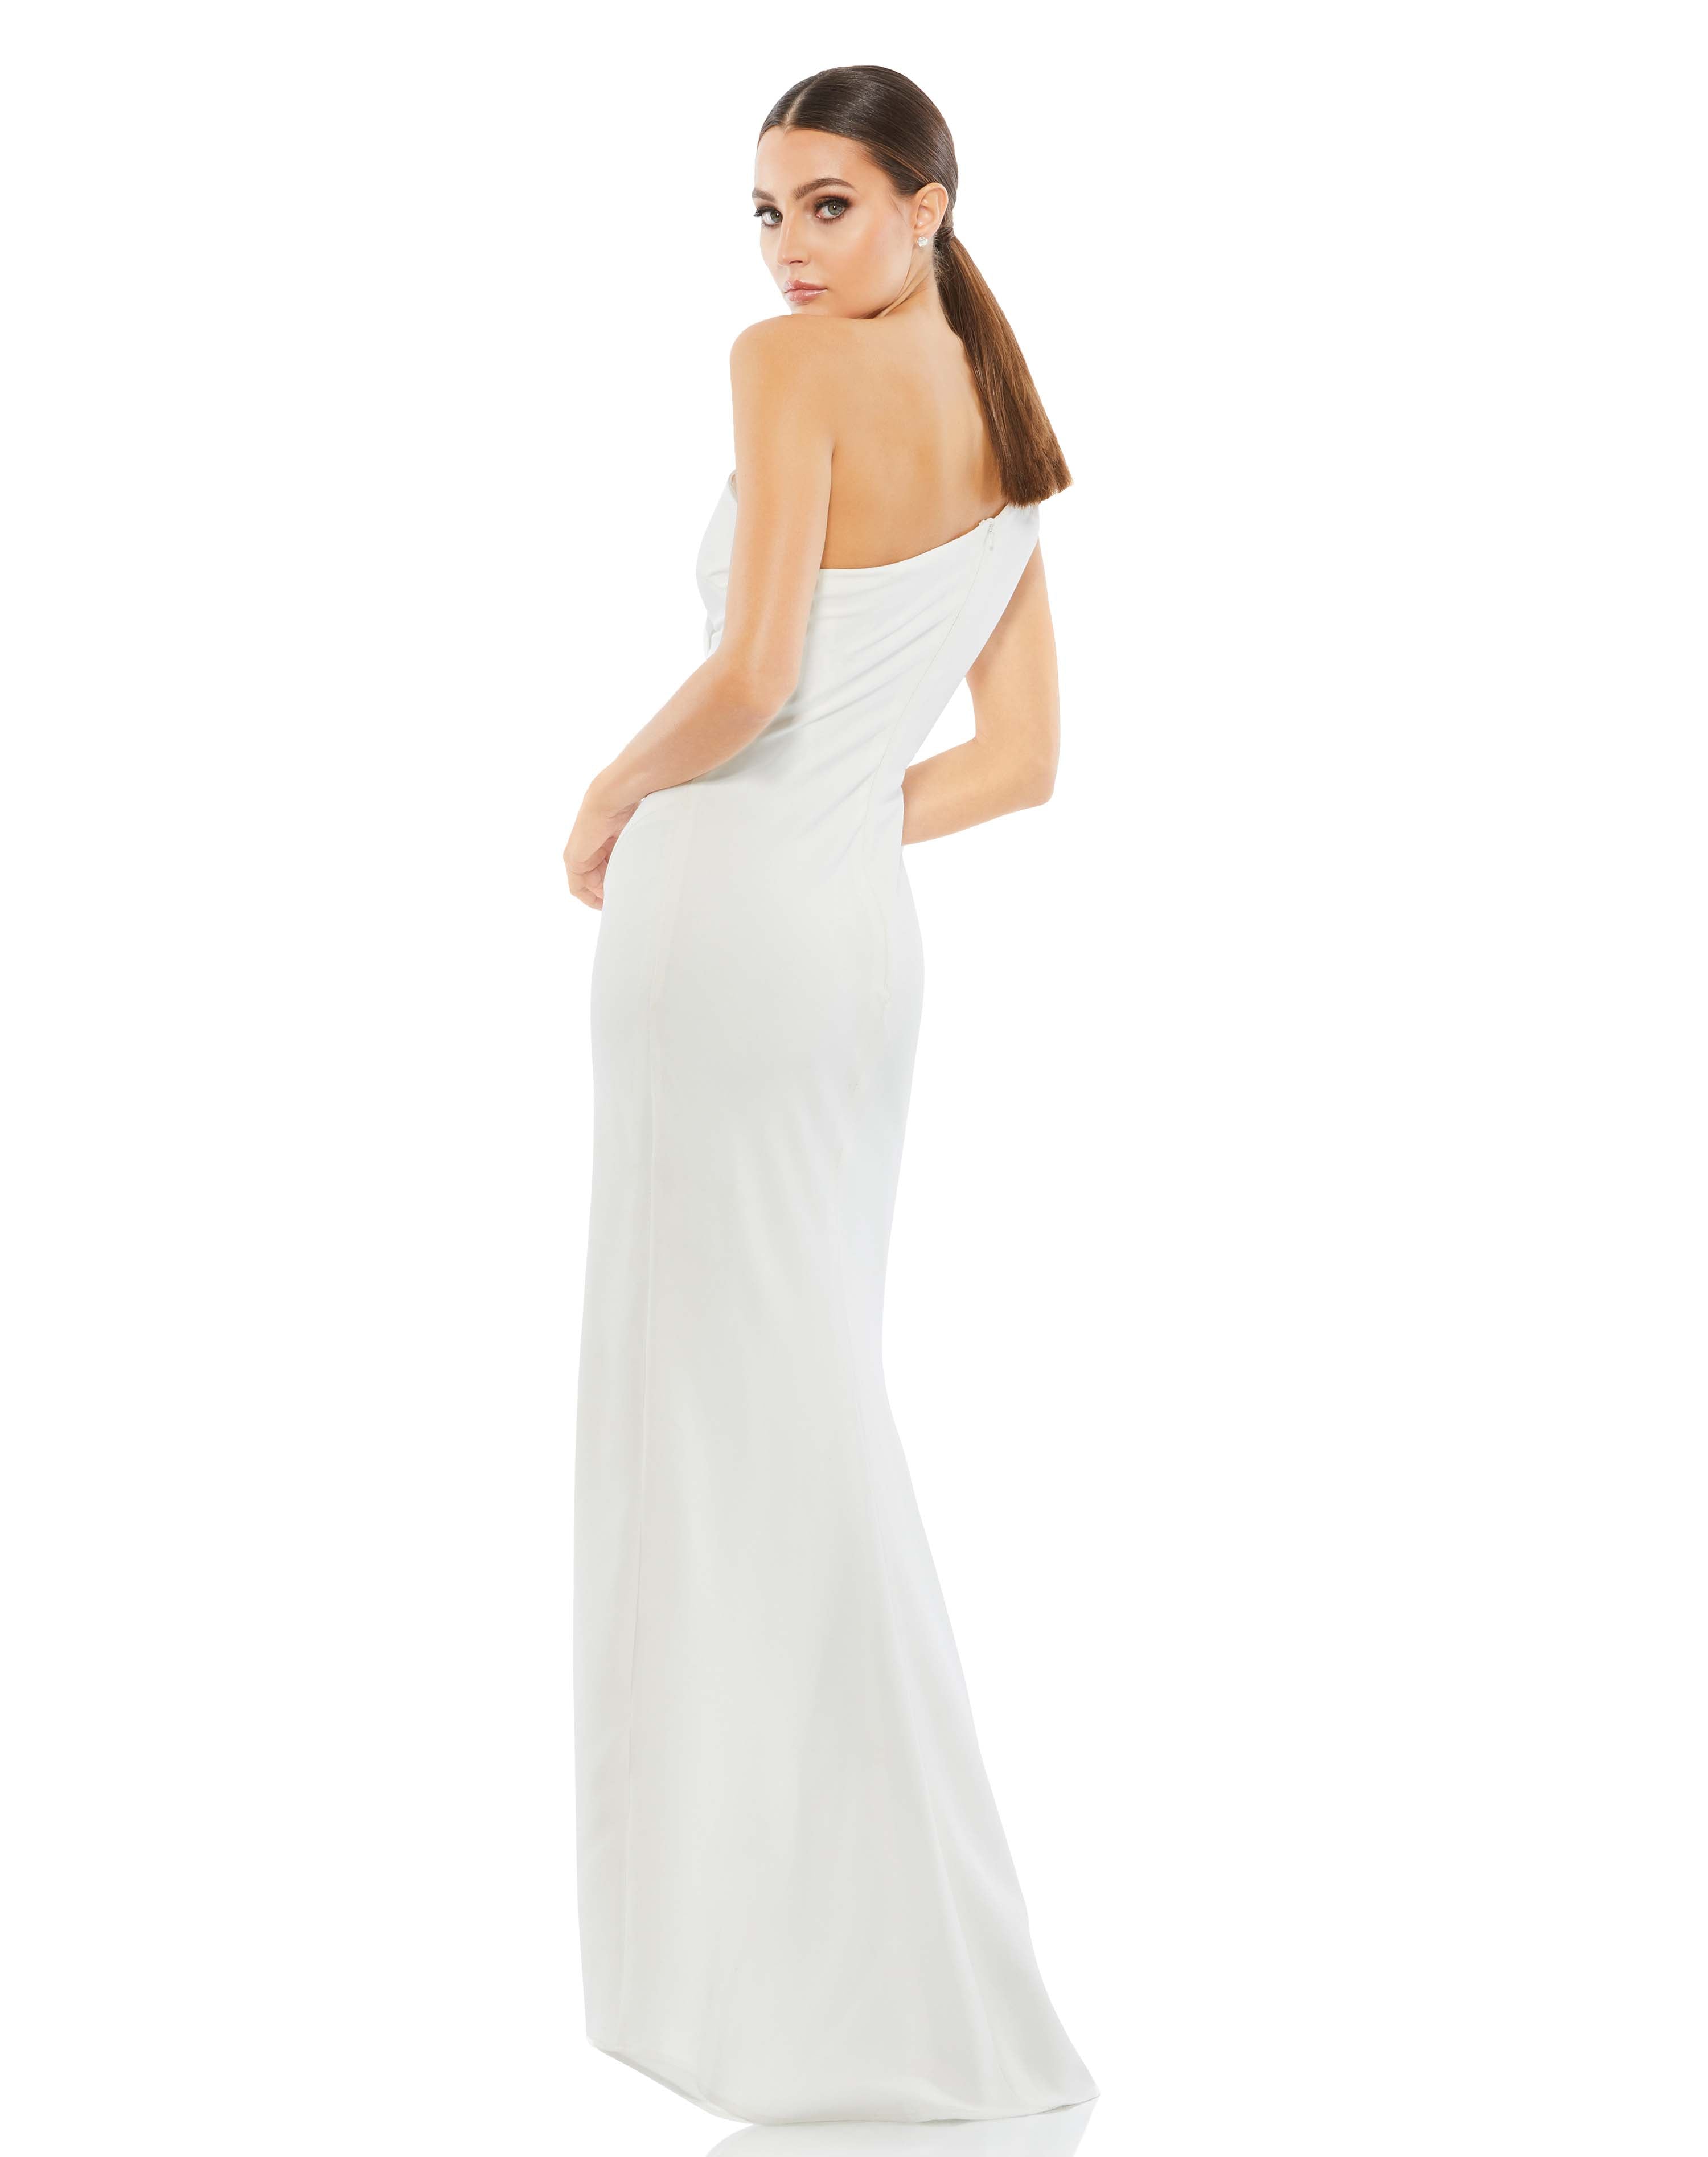 Bow One Shoulder Evening Gown